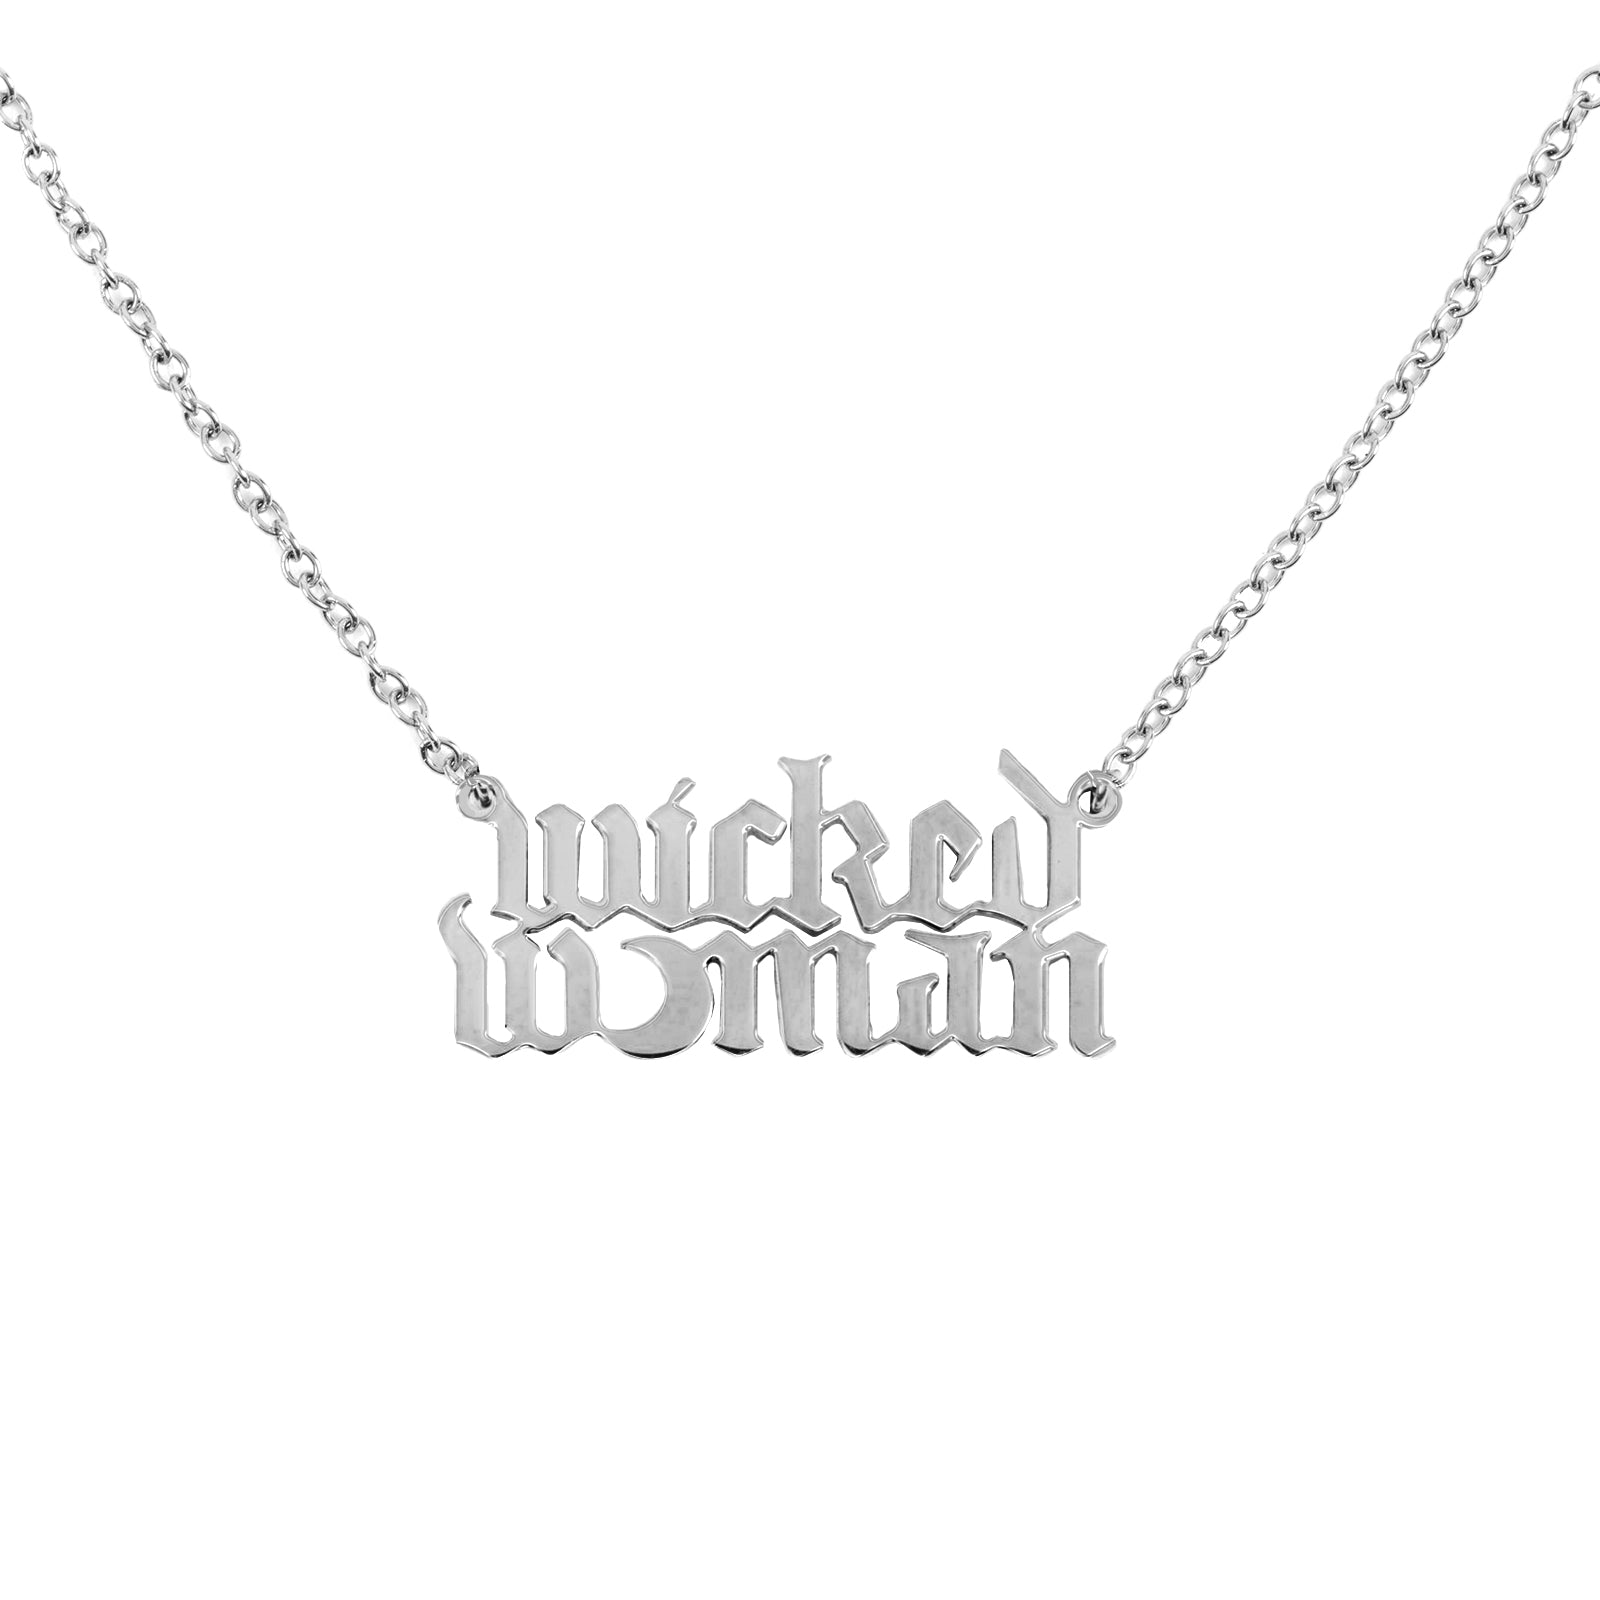 Wicked Woman Sterling Silver Necklace